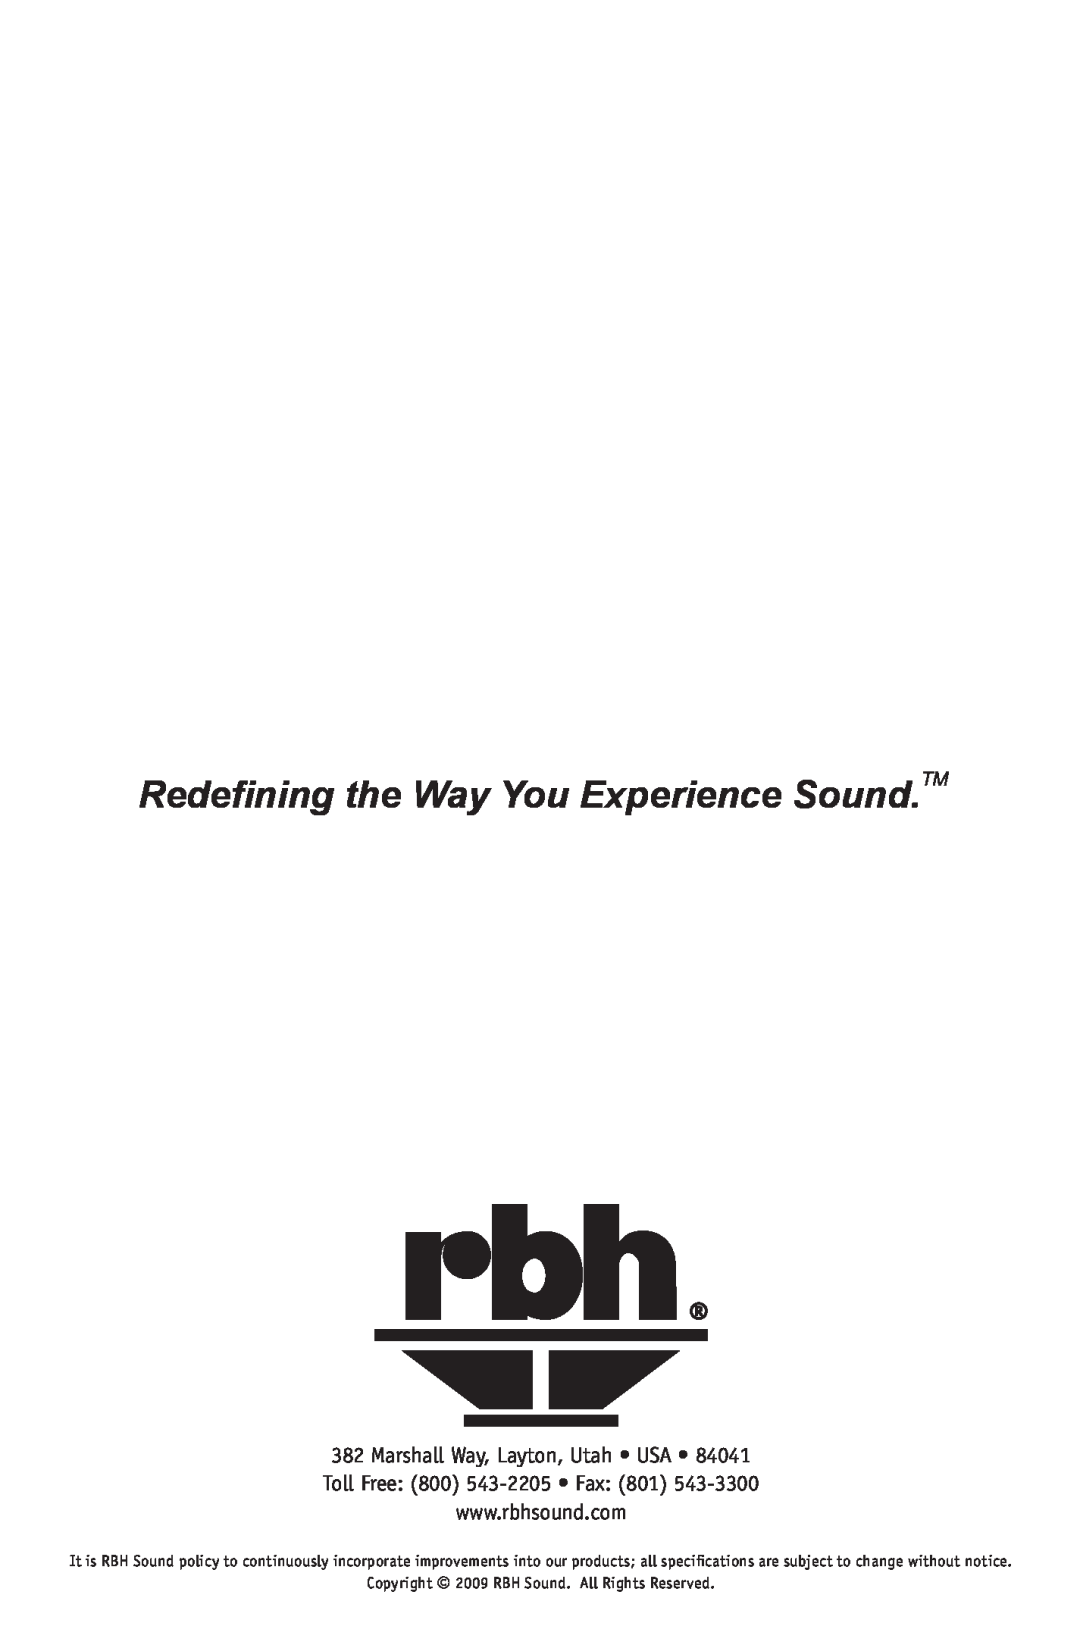 RBH Sound A-605/70 owner manual Redefining the Way You Experience Sound.TM, Copyright 2009 RBH Sound. All Rights Reserved 